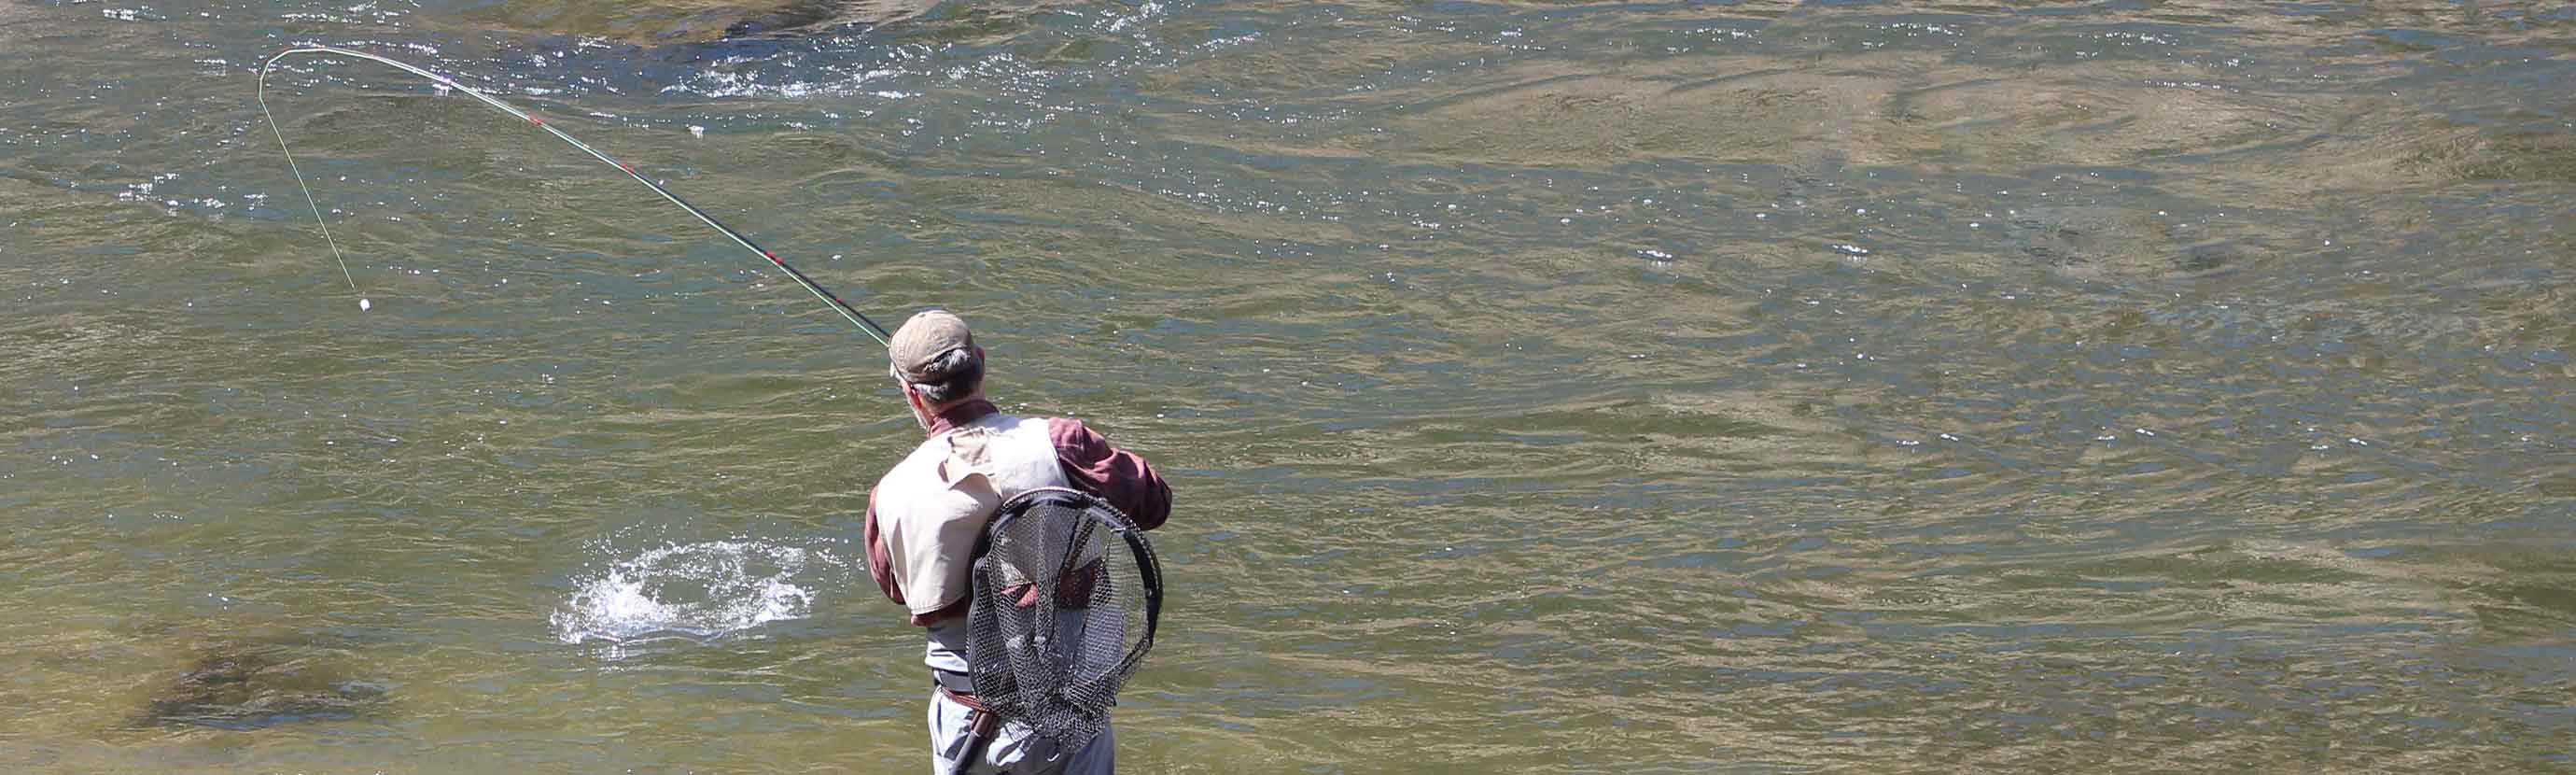 Get Hooked Up<sup>®</sup> On Montana Casting Co.<sup>®</sup> Fly Line!